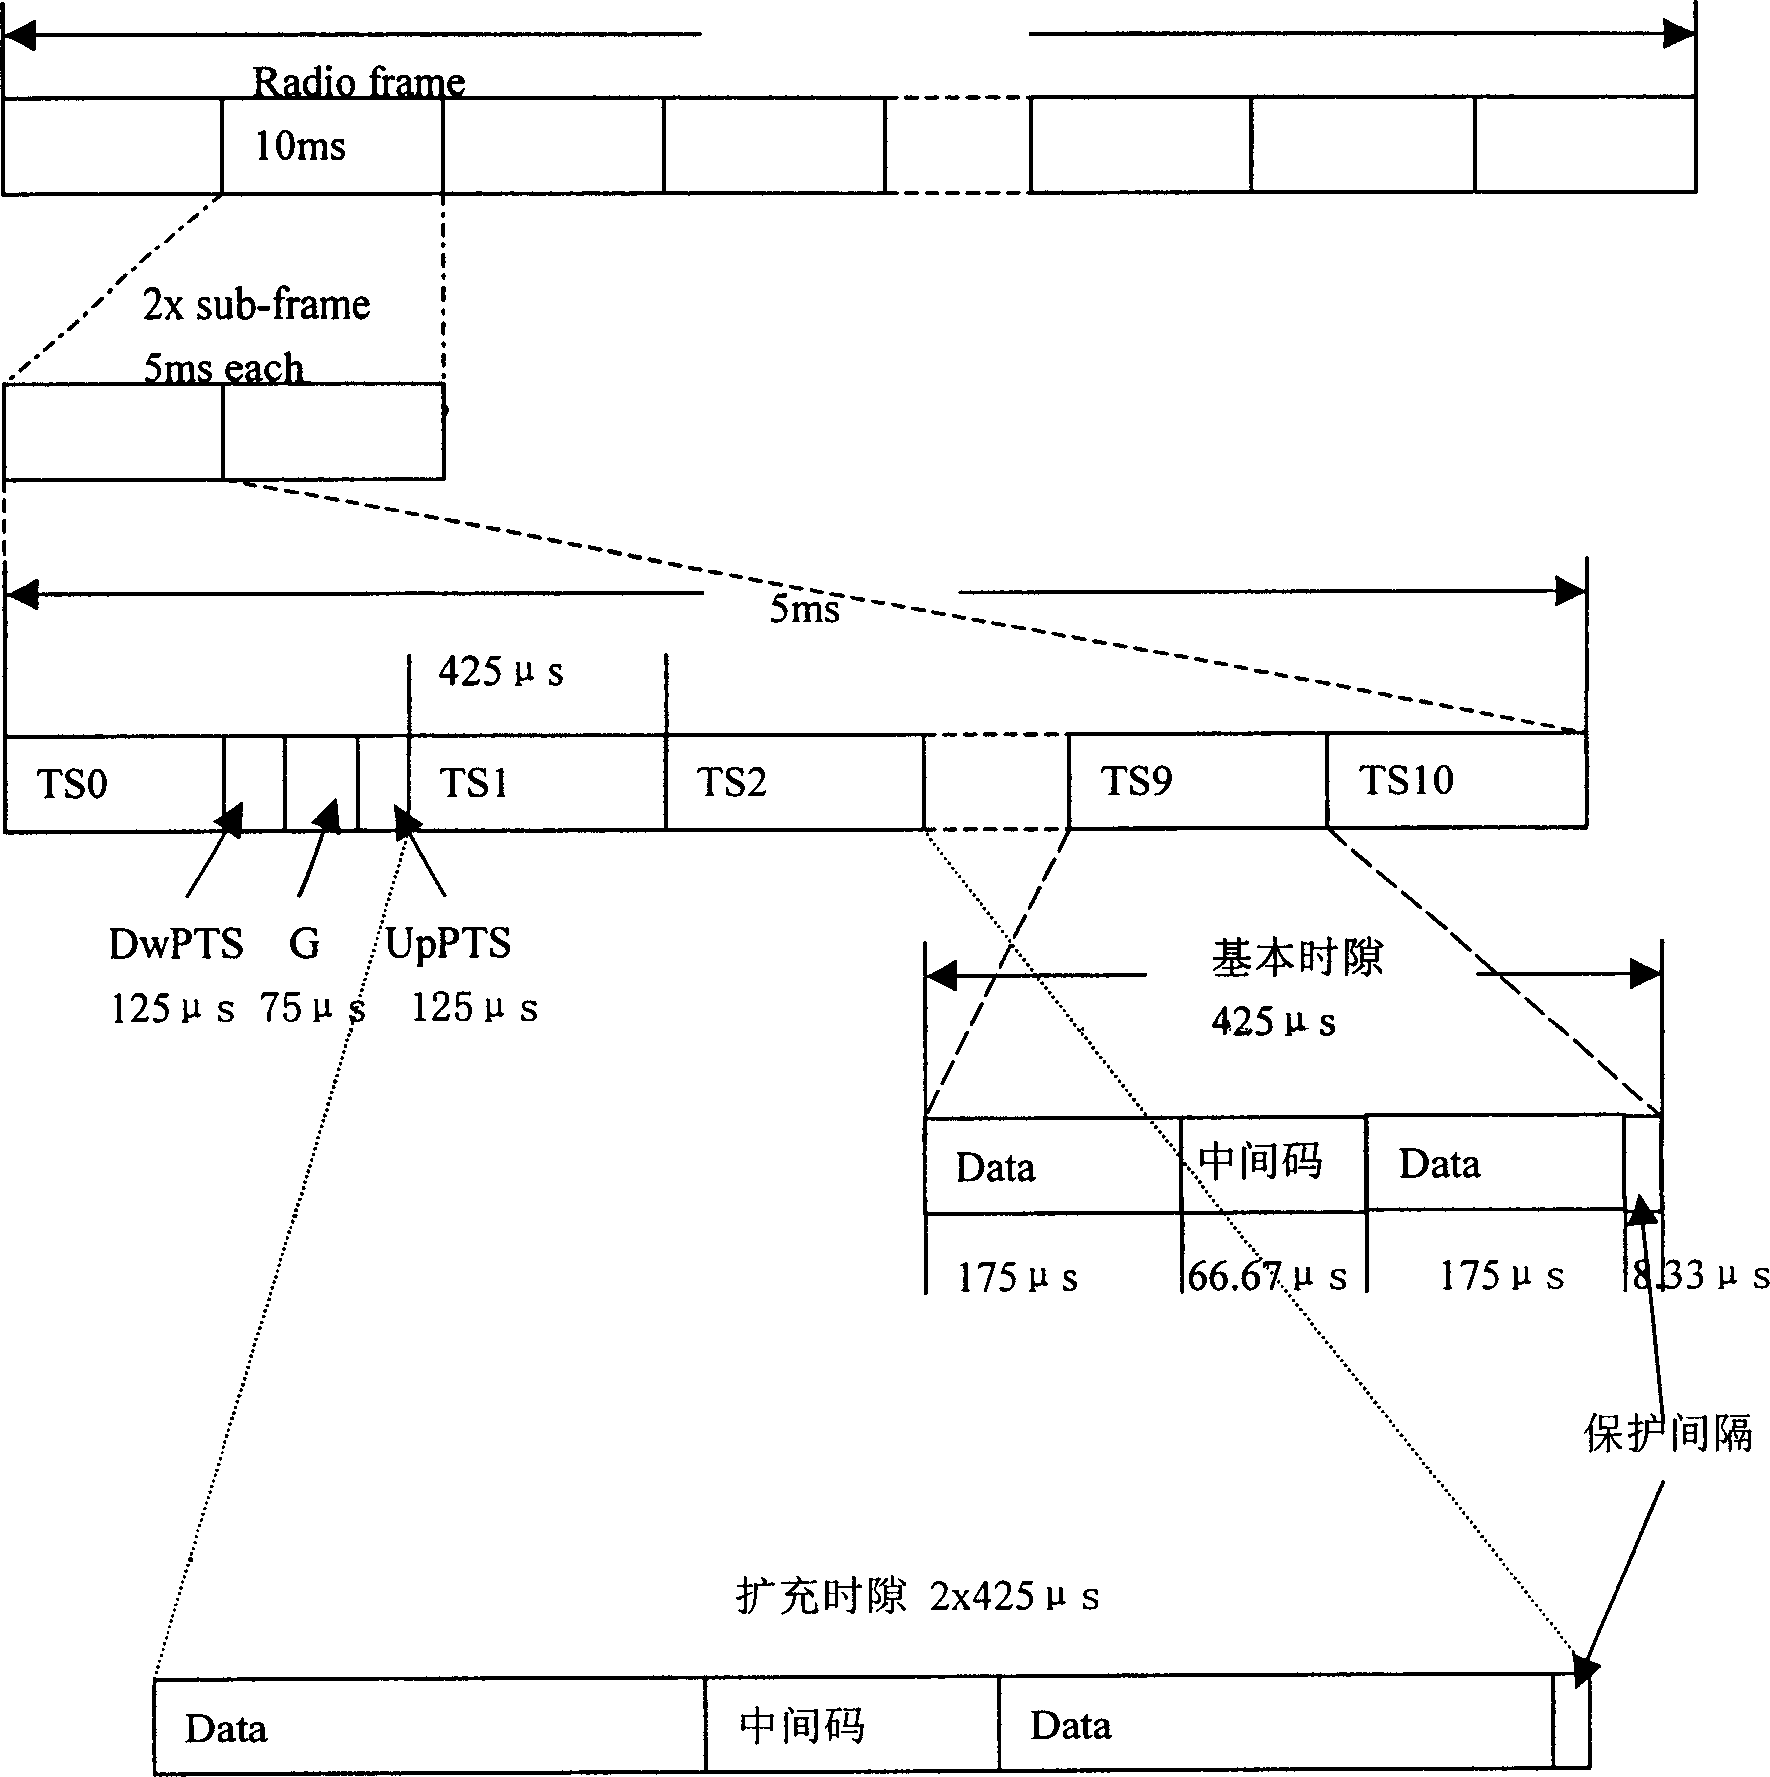 Method for radio transmission using high-efficient high performance frame structure for wide-band TDD system